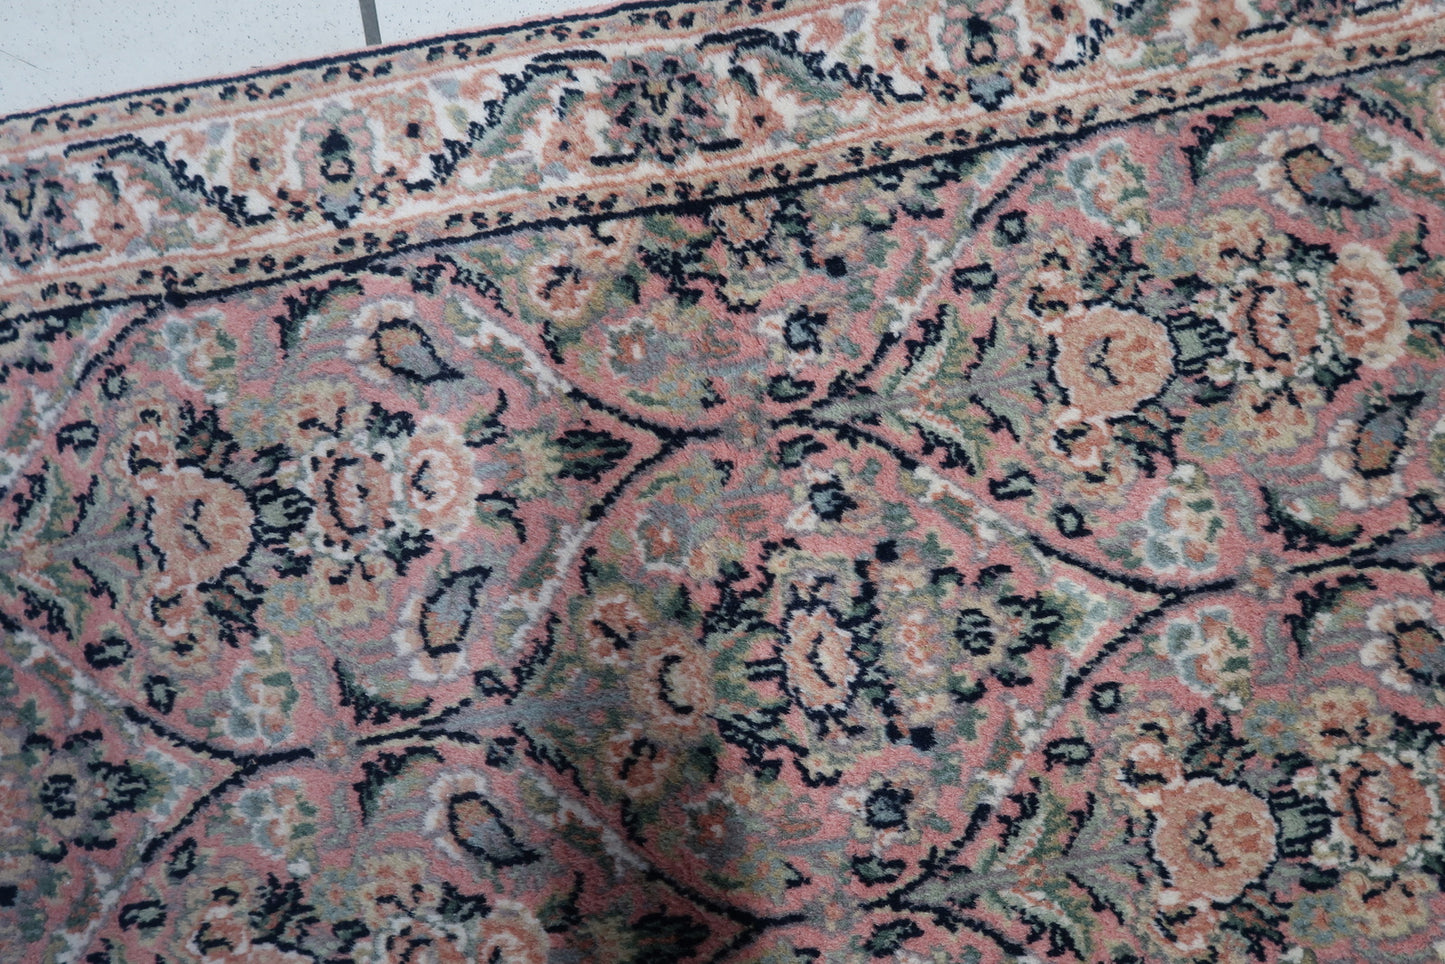 Detailed shot highlighting the beige background and delicate patterns of the rug.